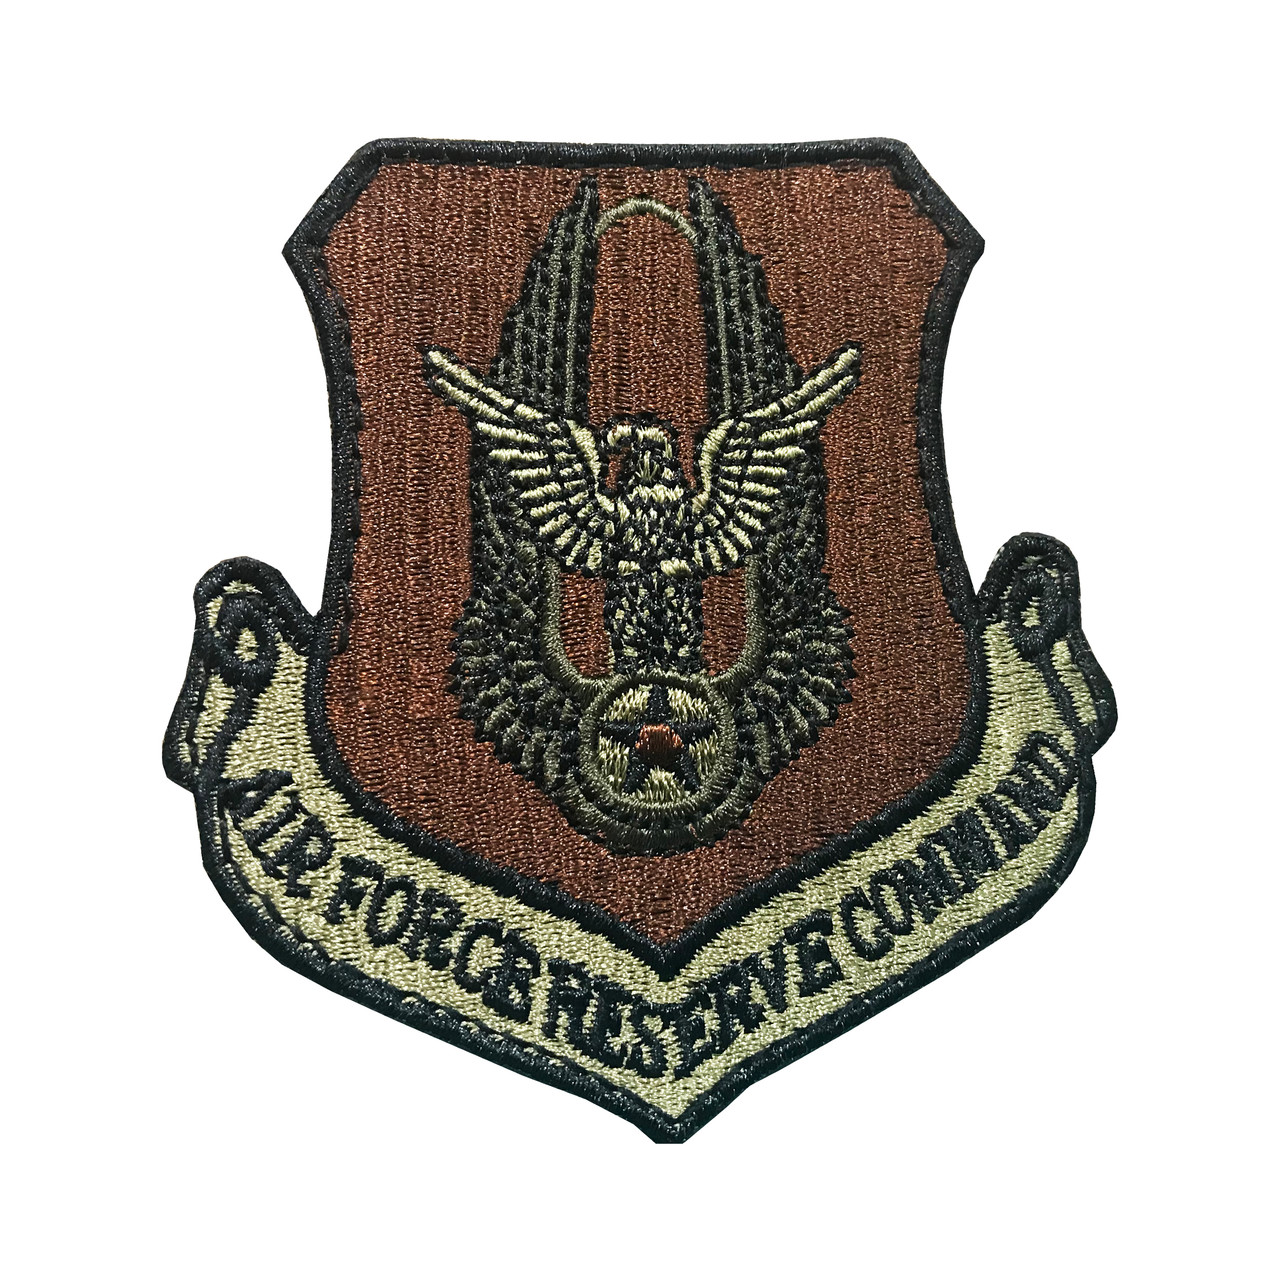 Air Force Reserve Command